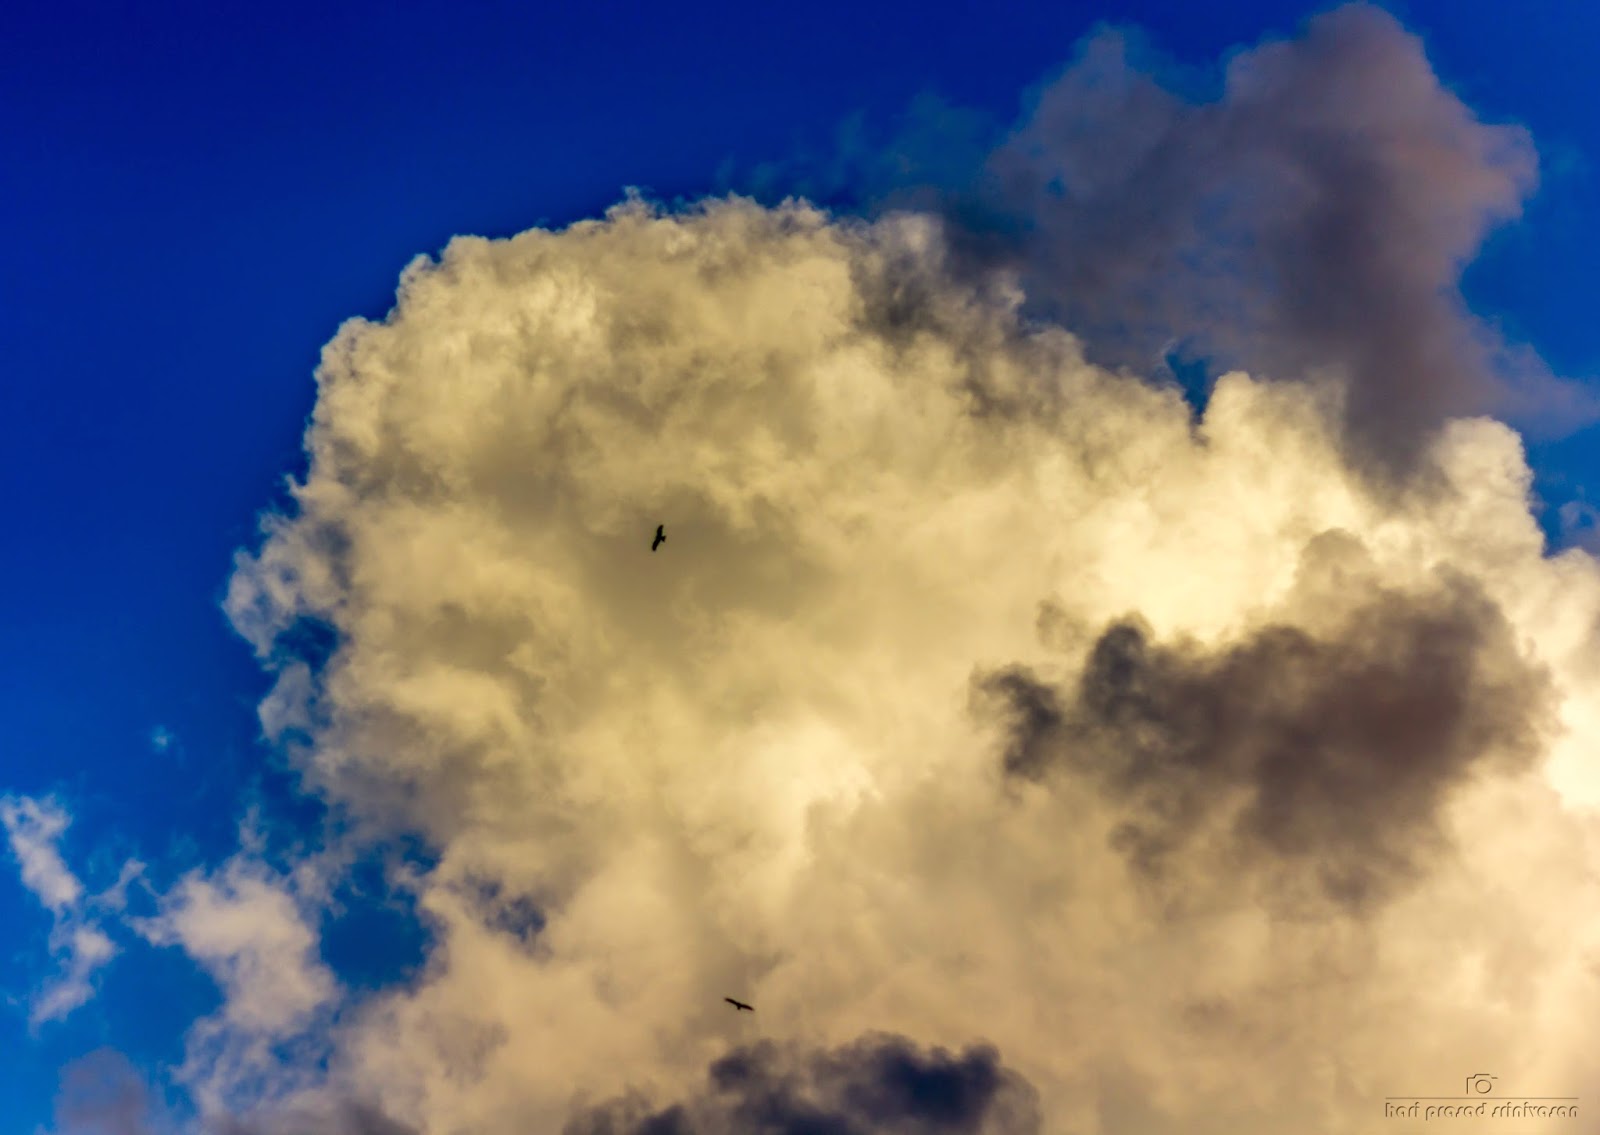 Cloud formation with a flying eagle